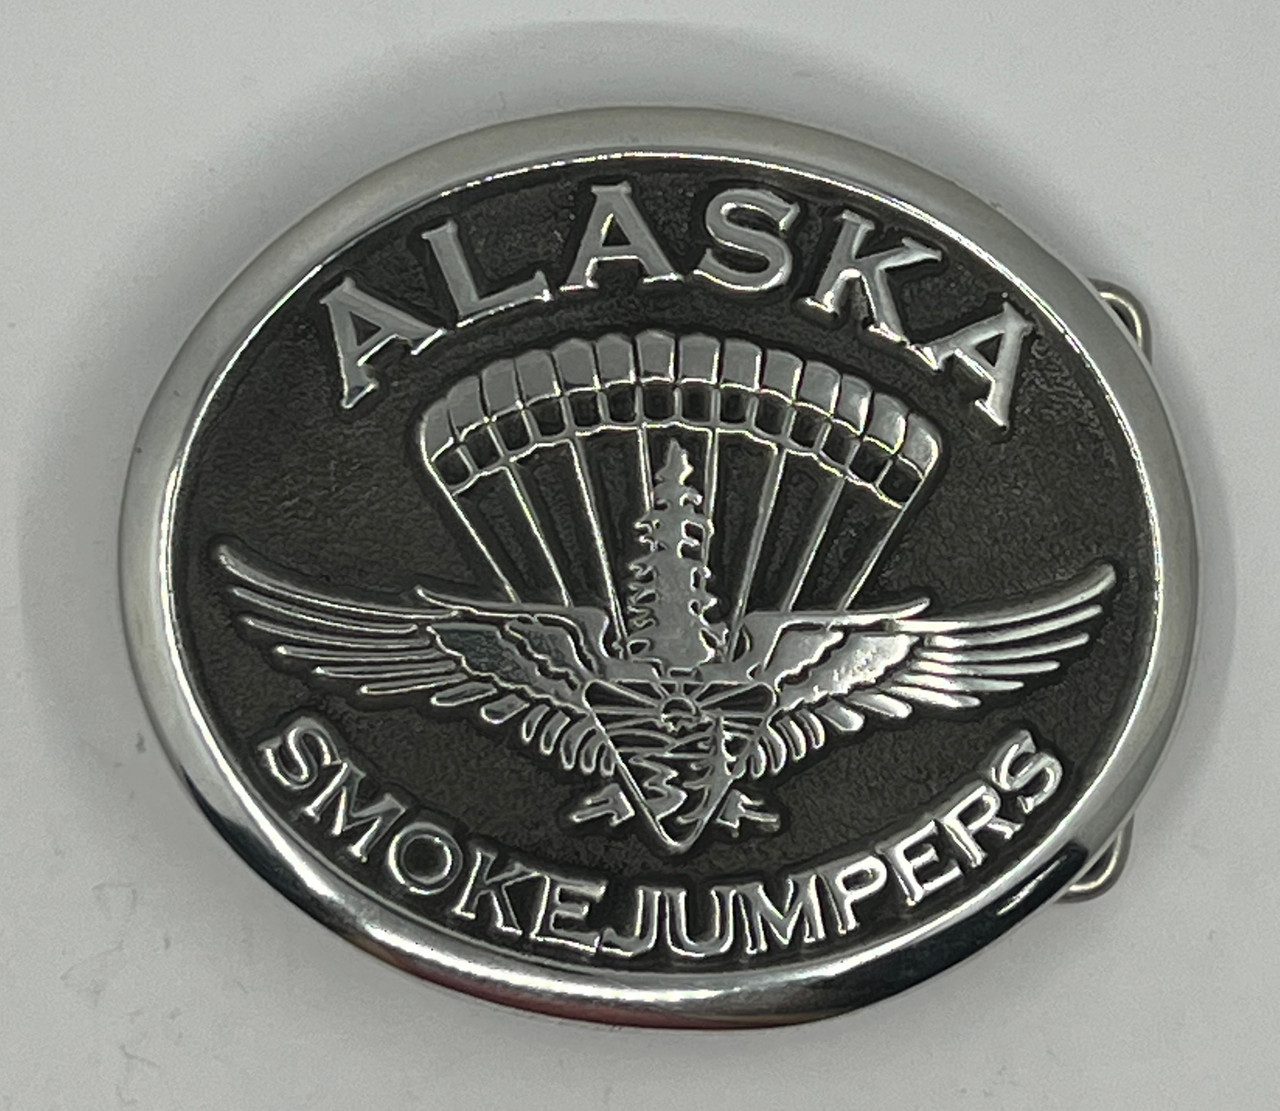 Alaska Smokejumpers BLM Buckle (RESTRICTED)